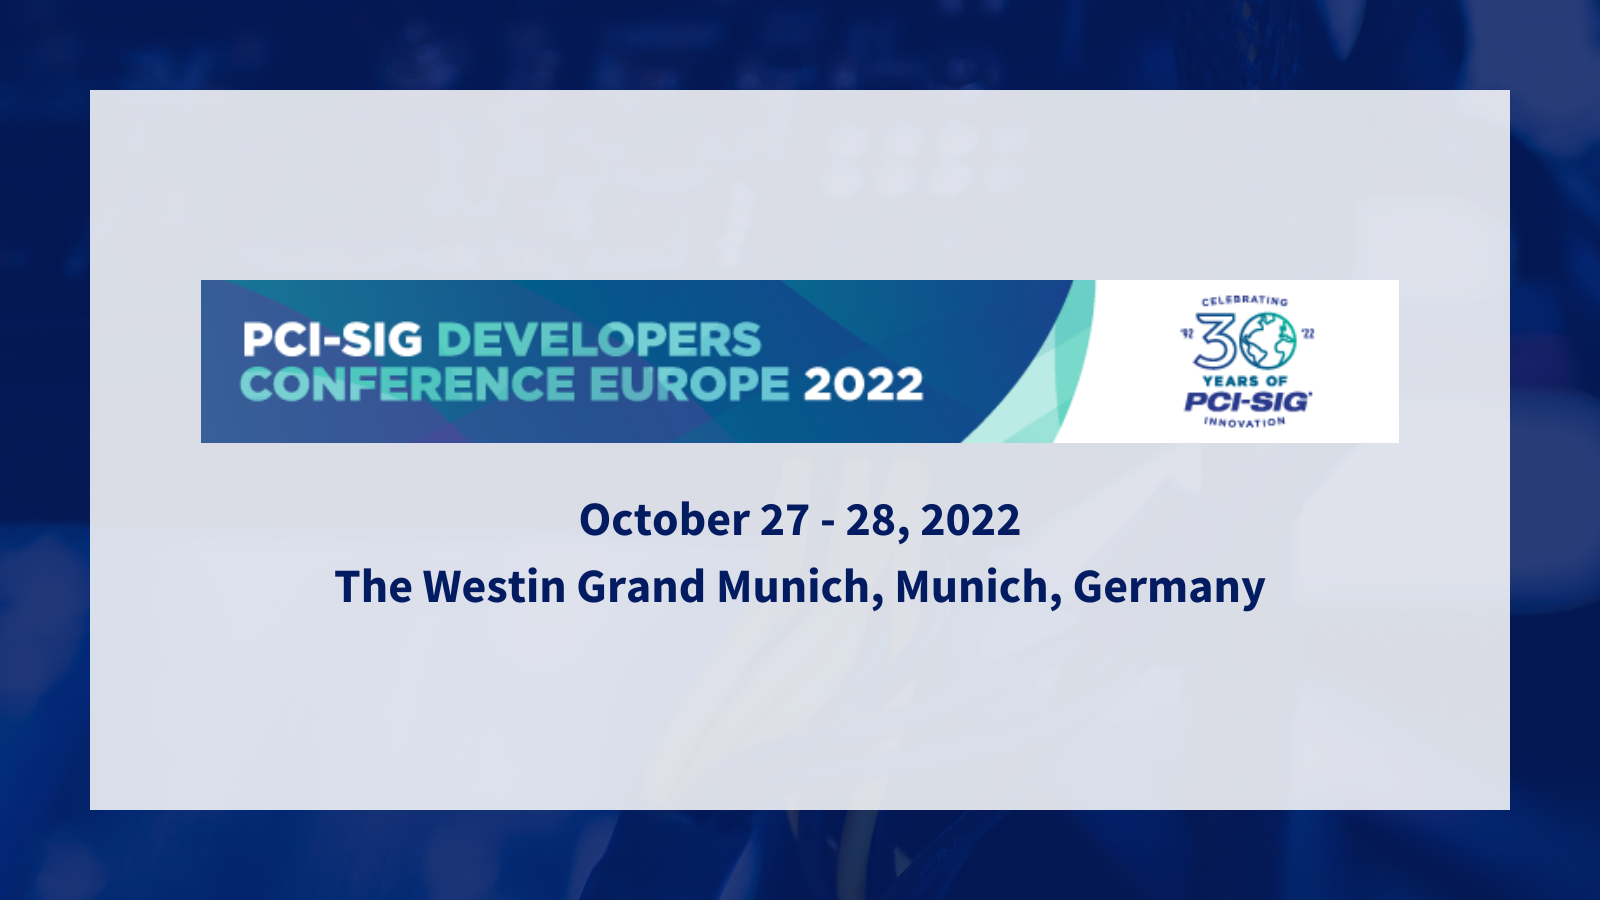 PCI-SIG Developers Conference Europe 2022